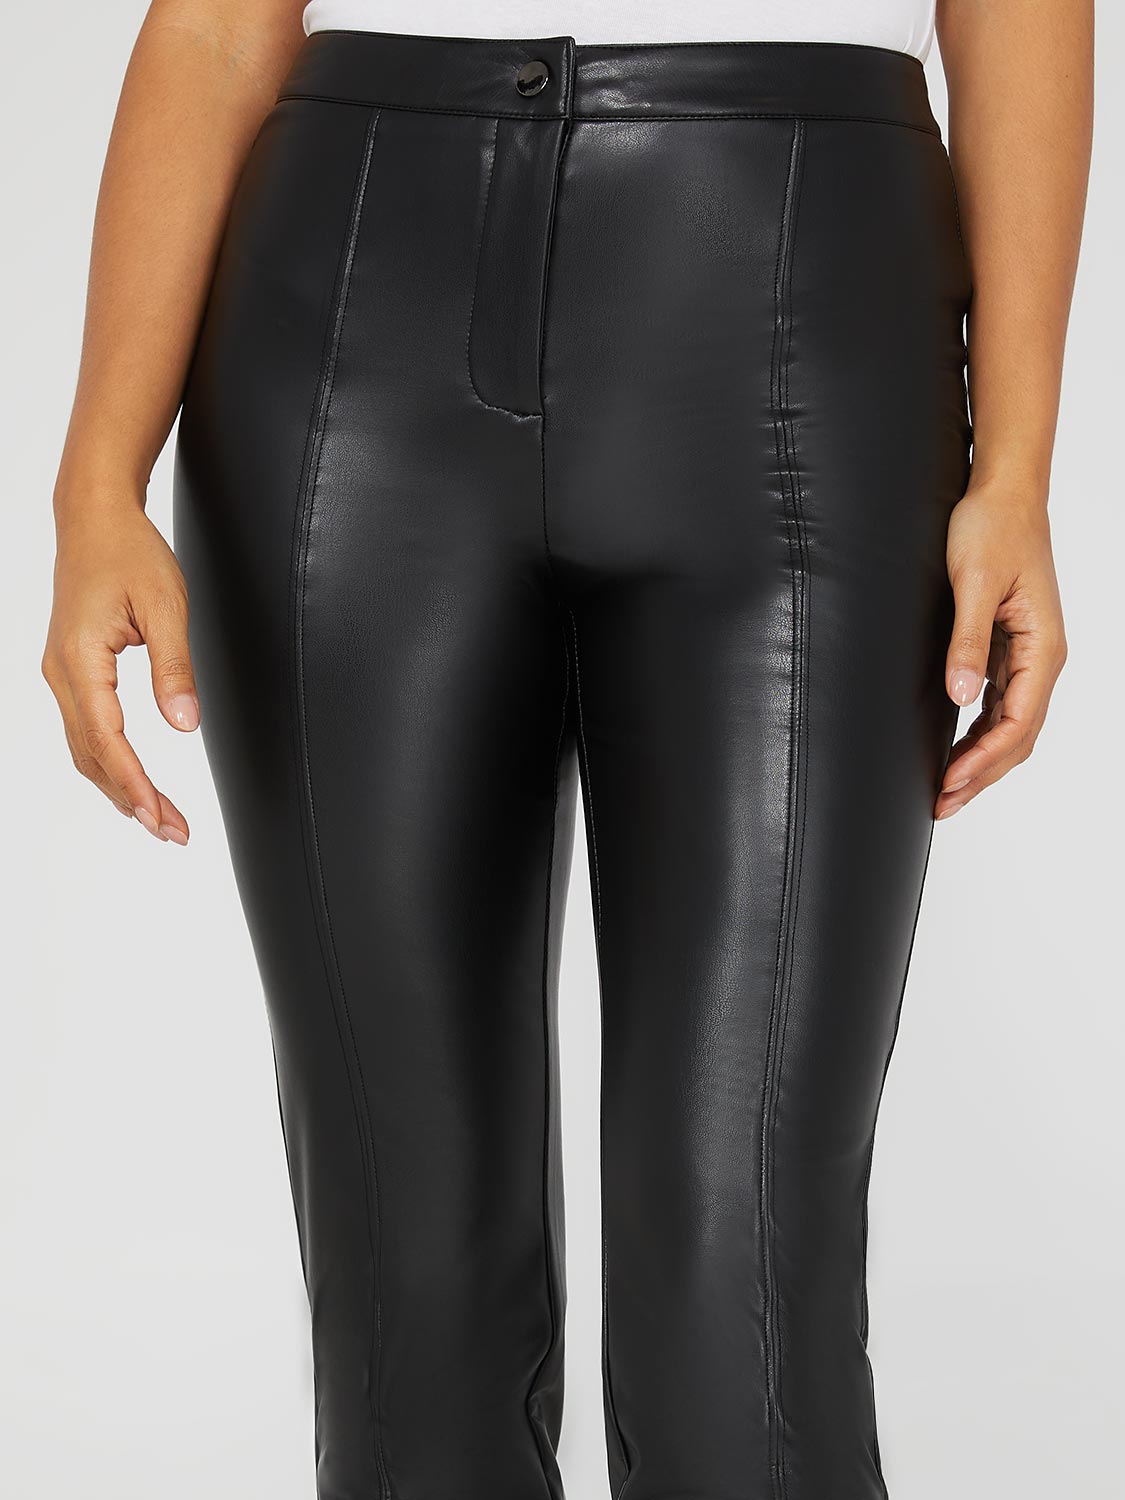 Trousers Jeggings: Faux Leather Look Skinny PAM - Black - Soya Concept:  Waist:36